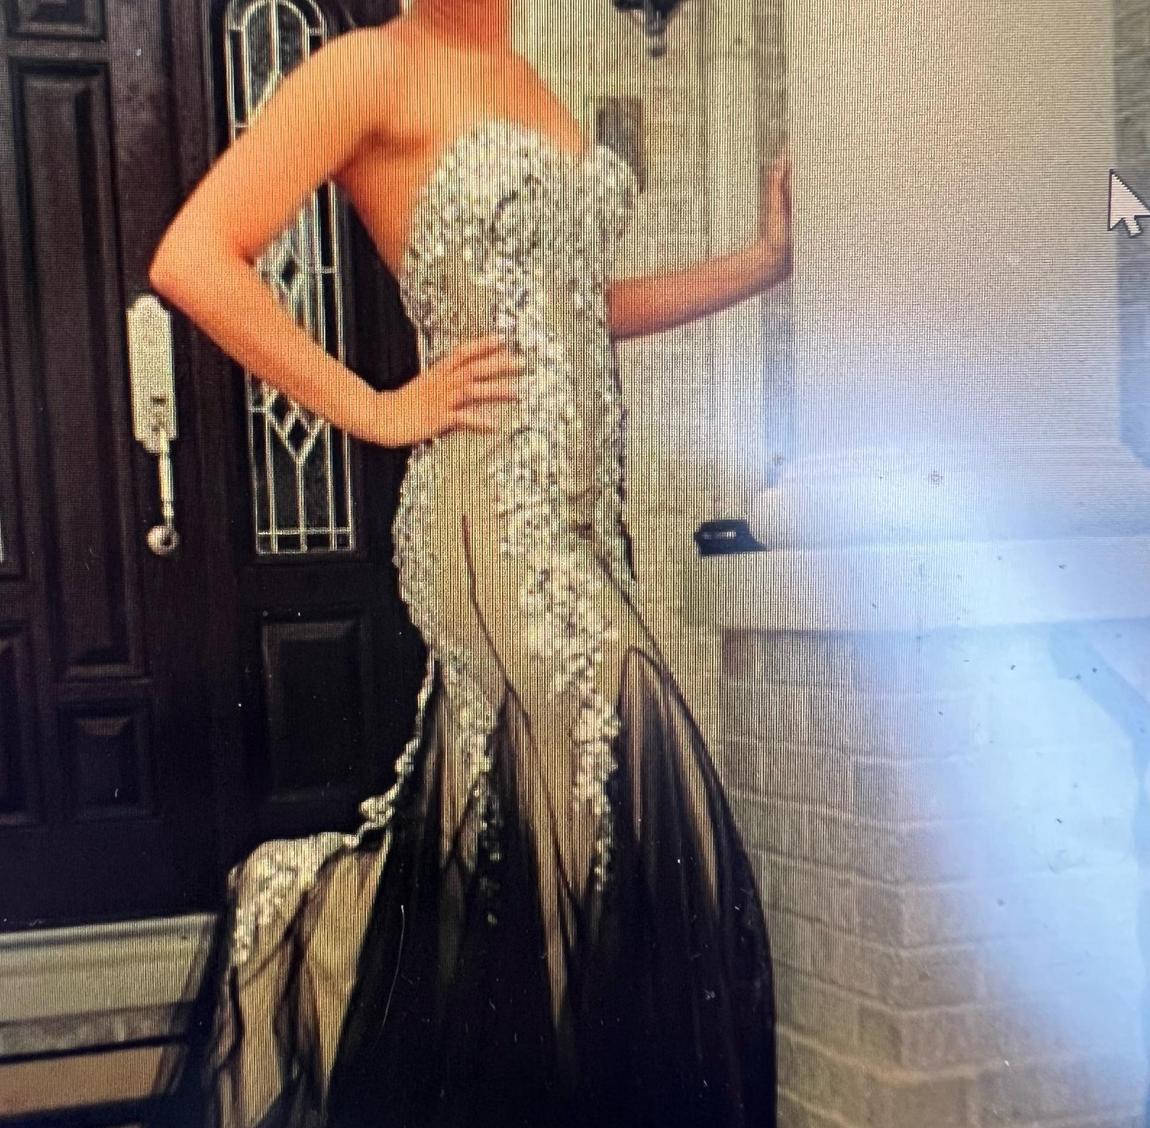 Size 4 Prom Strapless Sequined Black Mermaid Dress on Queenly